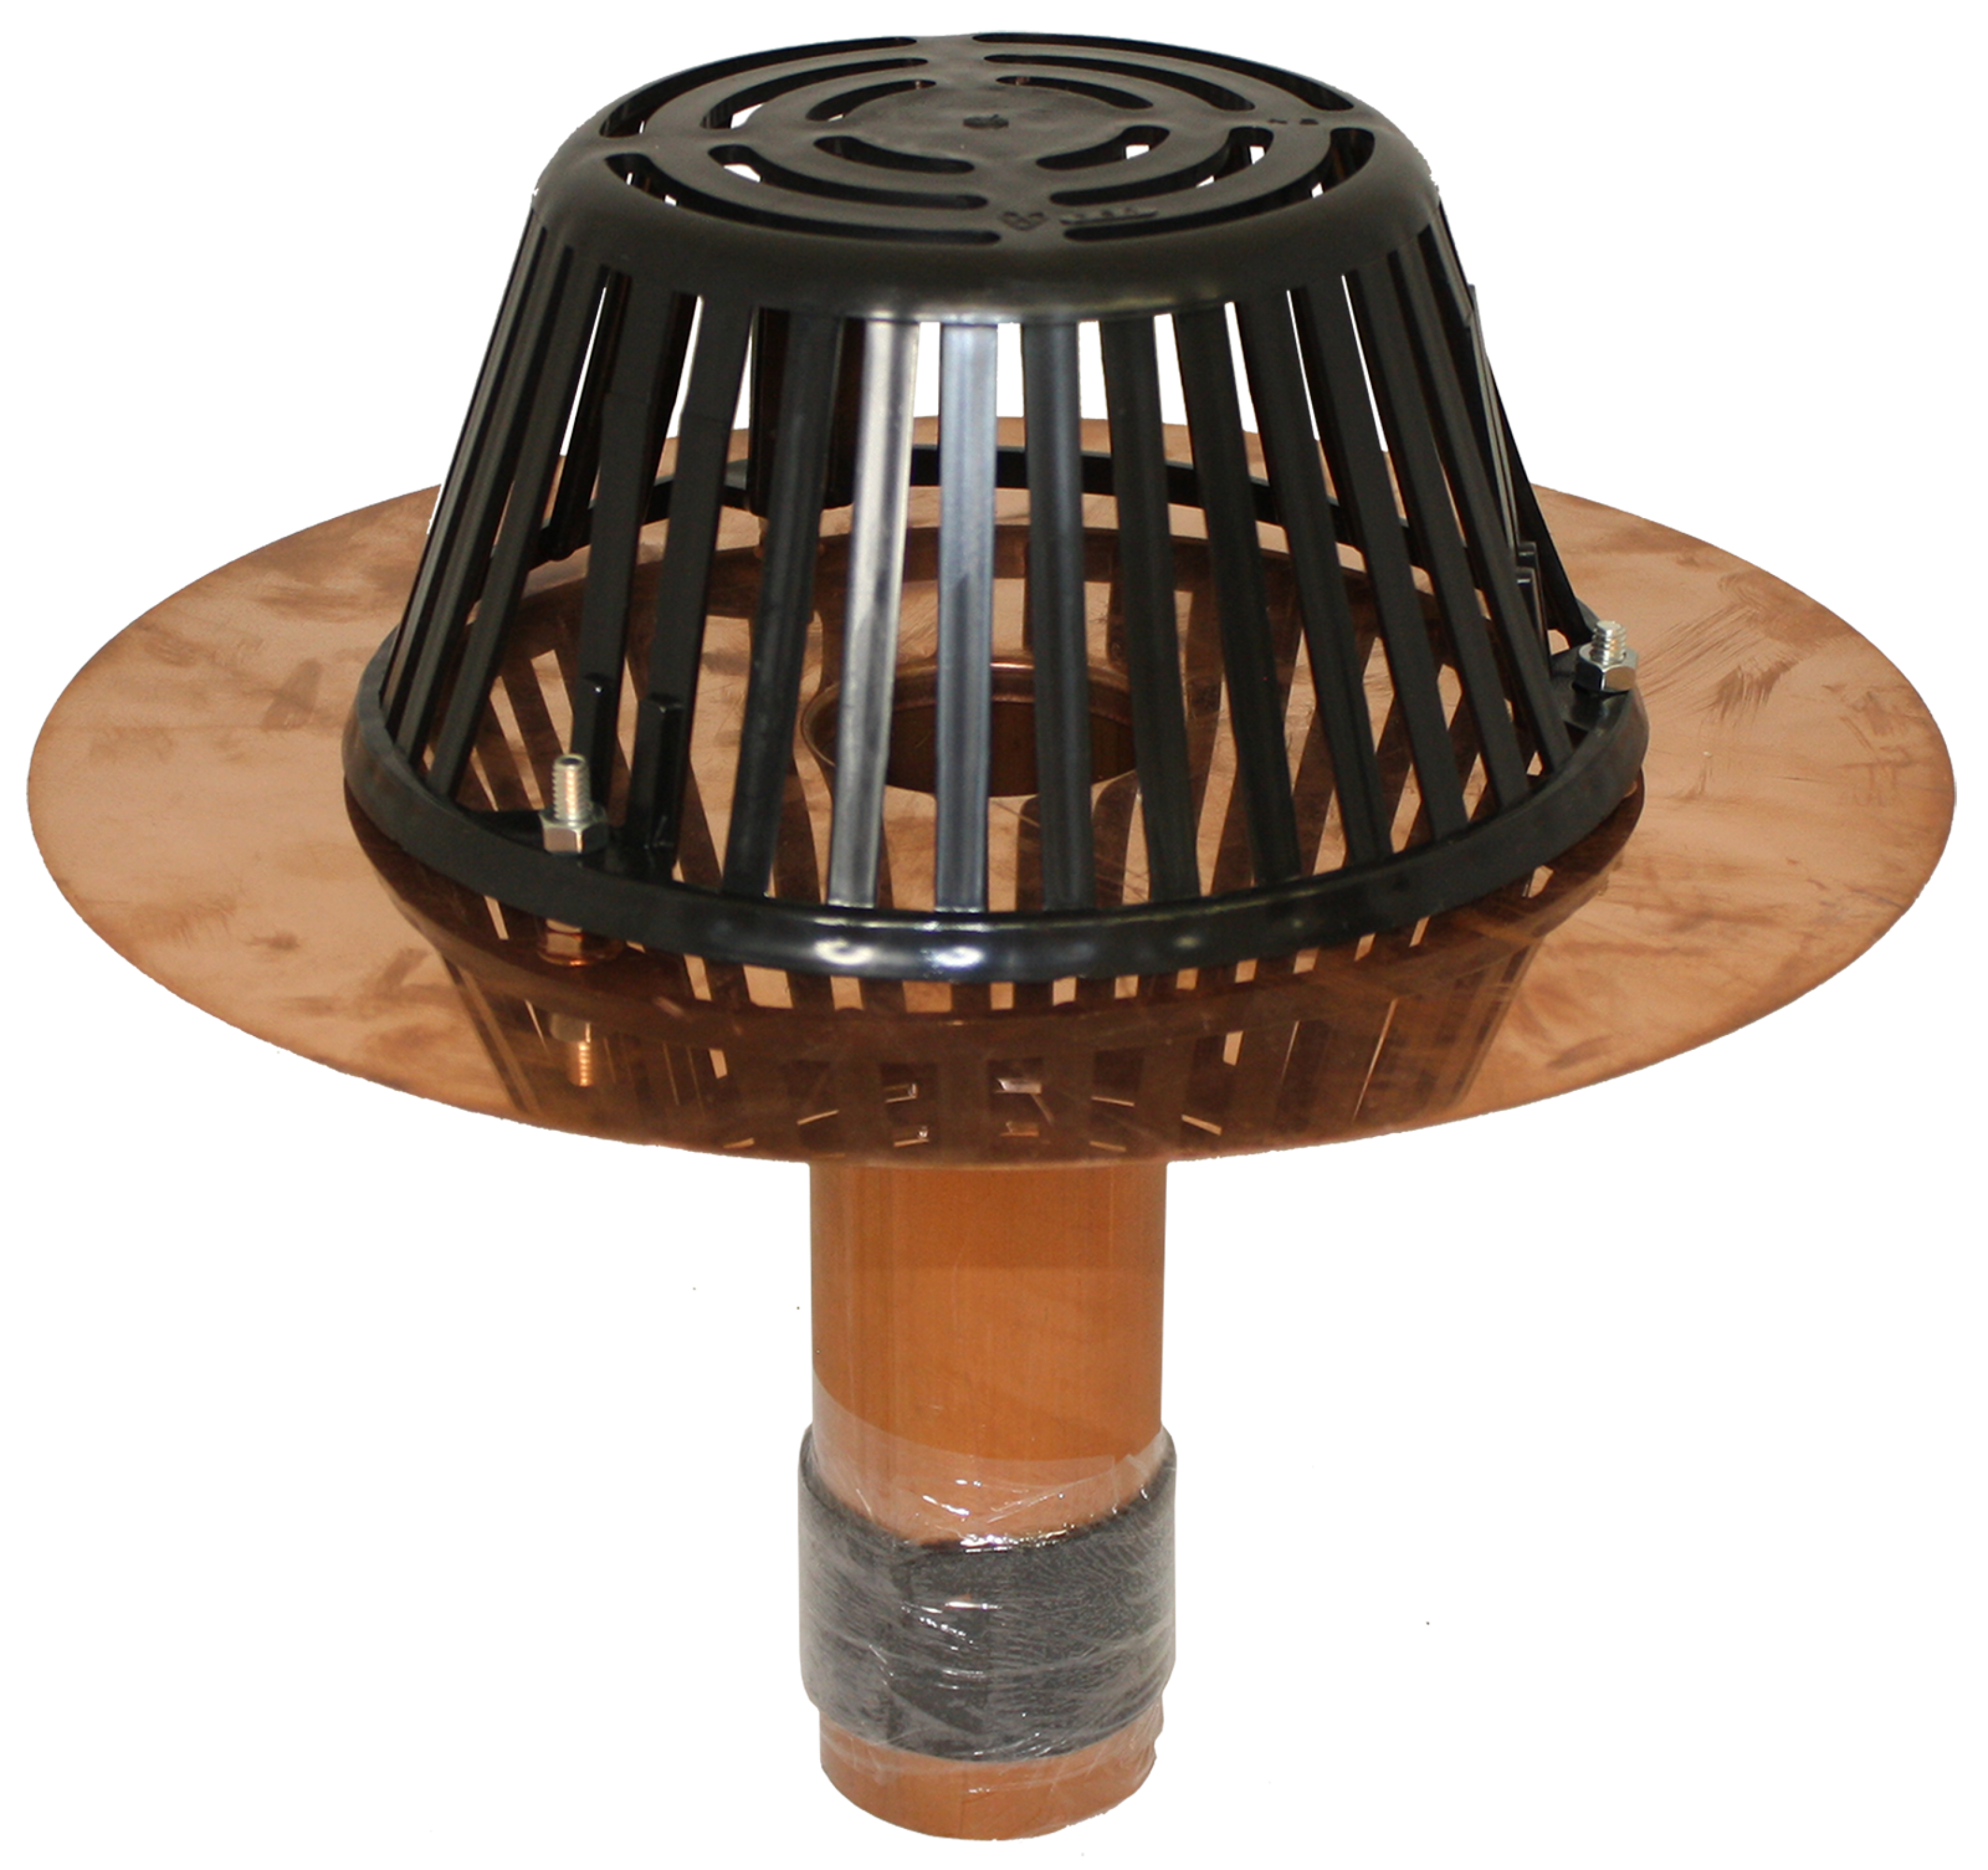 CopperTite Roof Drain Marathon Roofing Products, Inc.